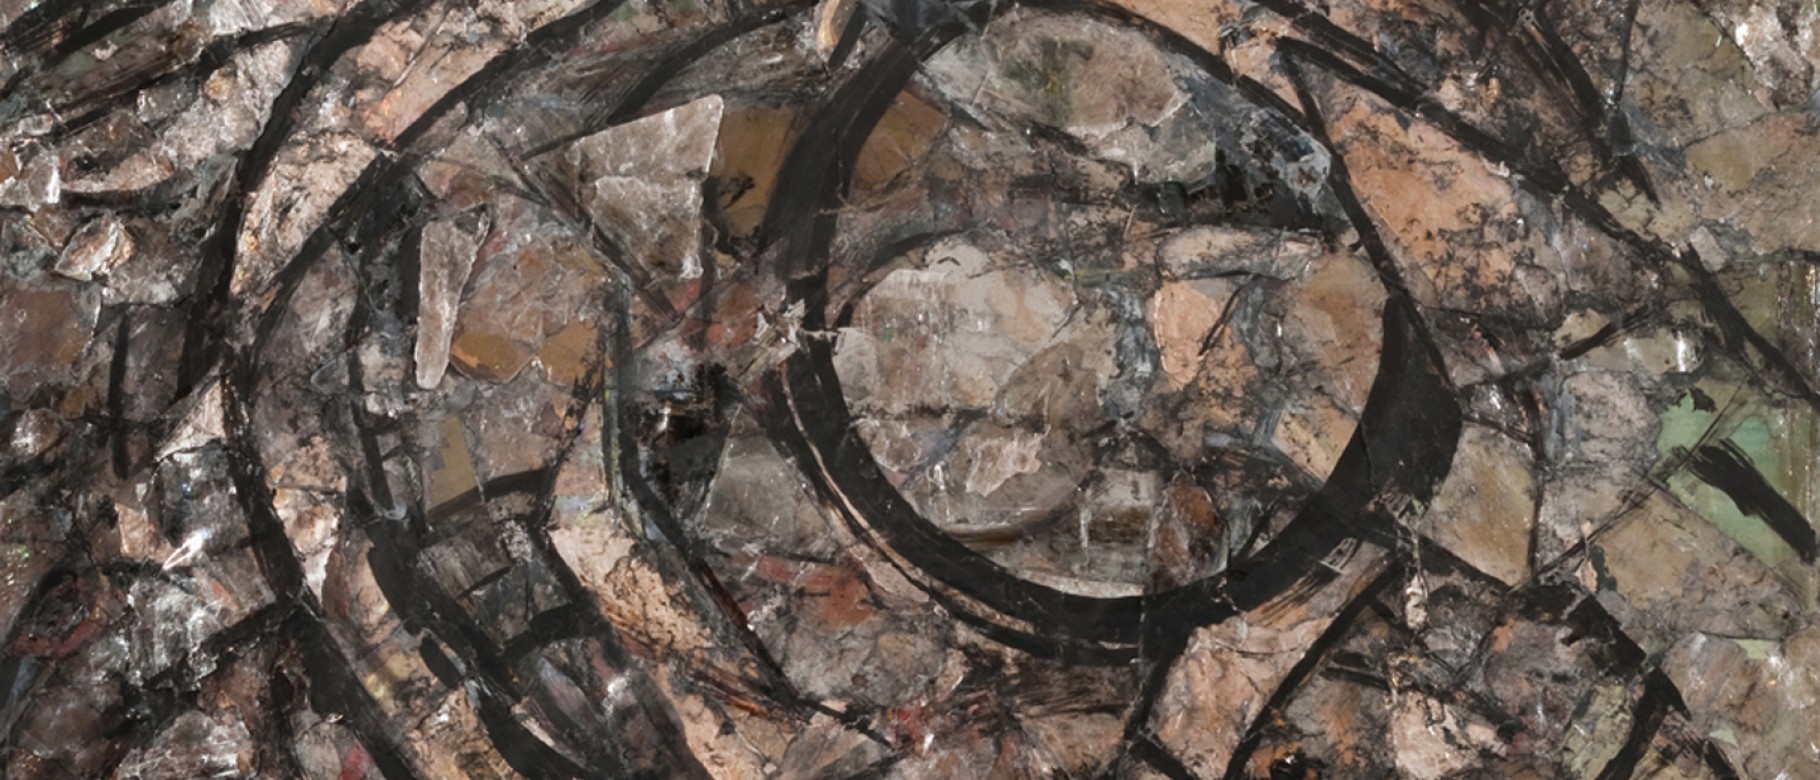 Mildred G. Burrage, "Collage with Maine Mica" (Detail)